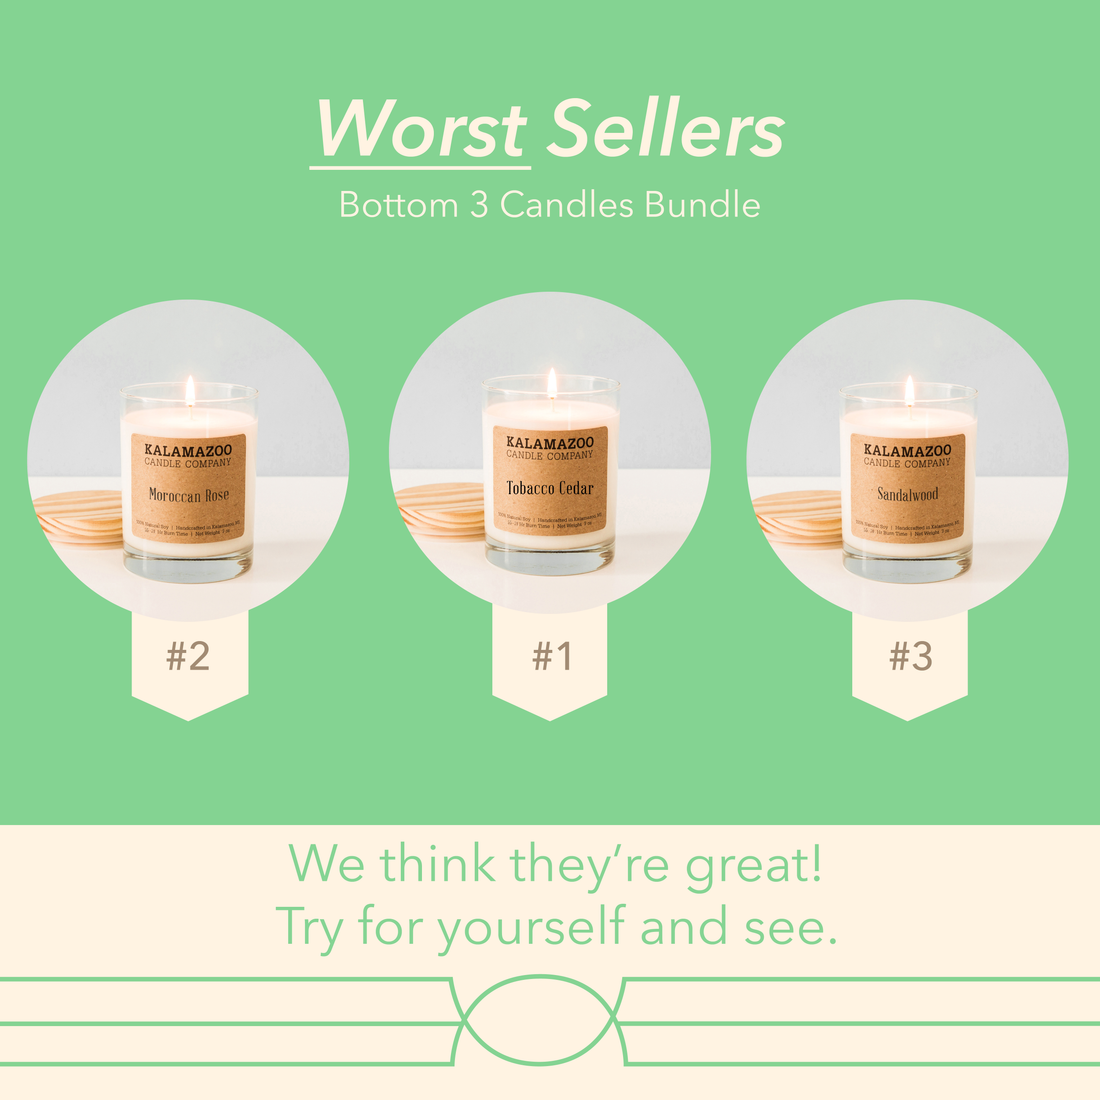 Bottom 3 Worst Selling Candles